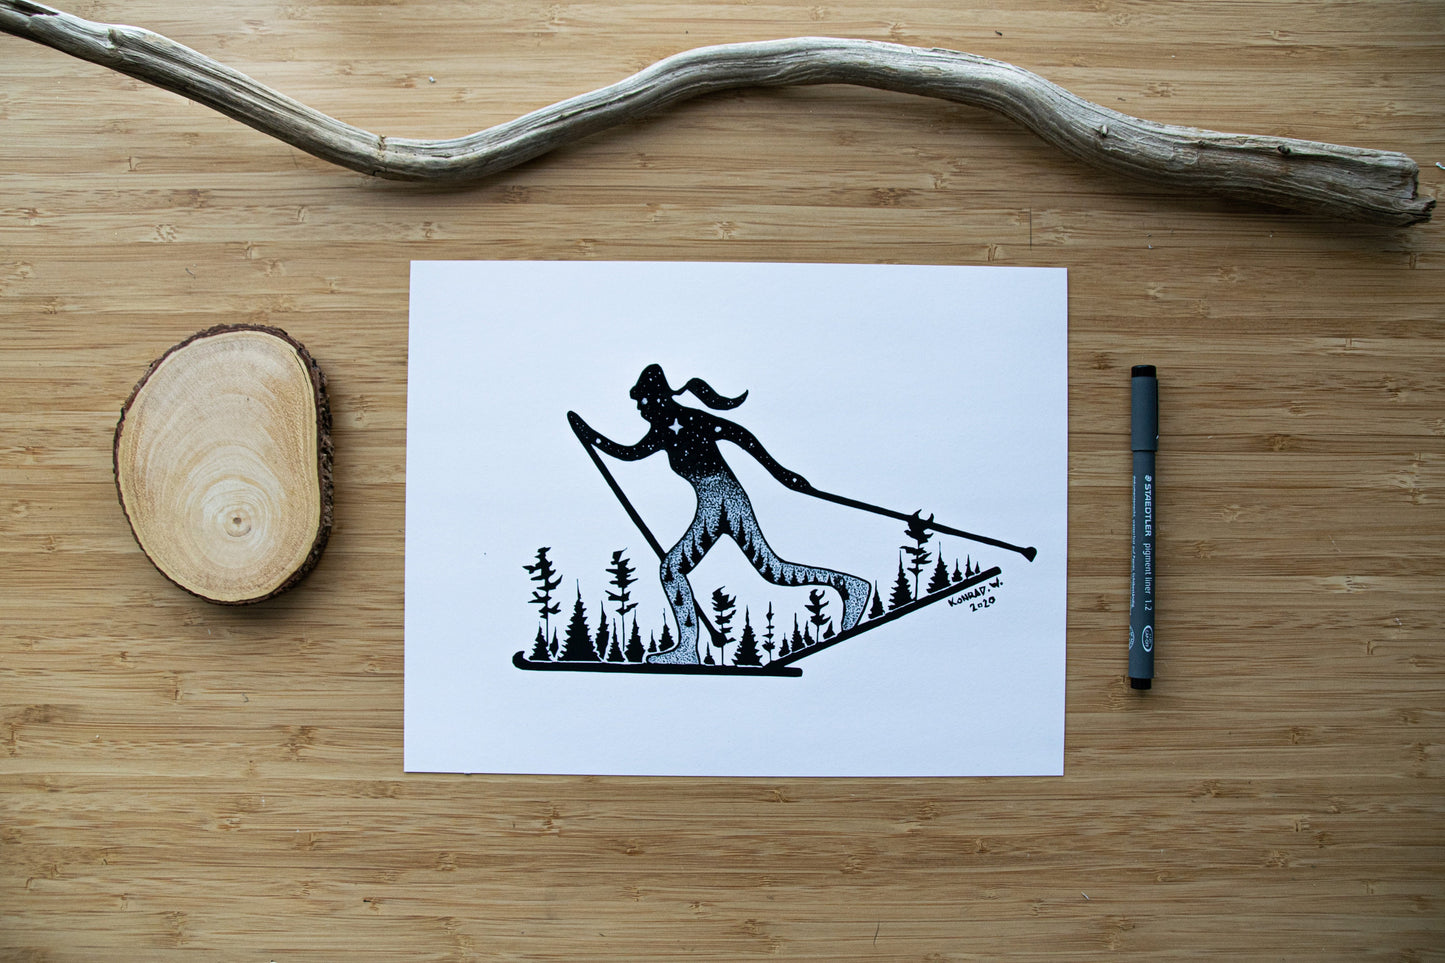 Female Nordic Skier - Pen and Ink PRINT